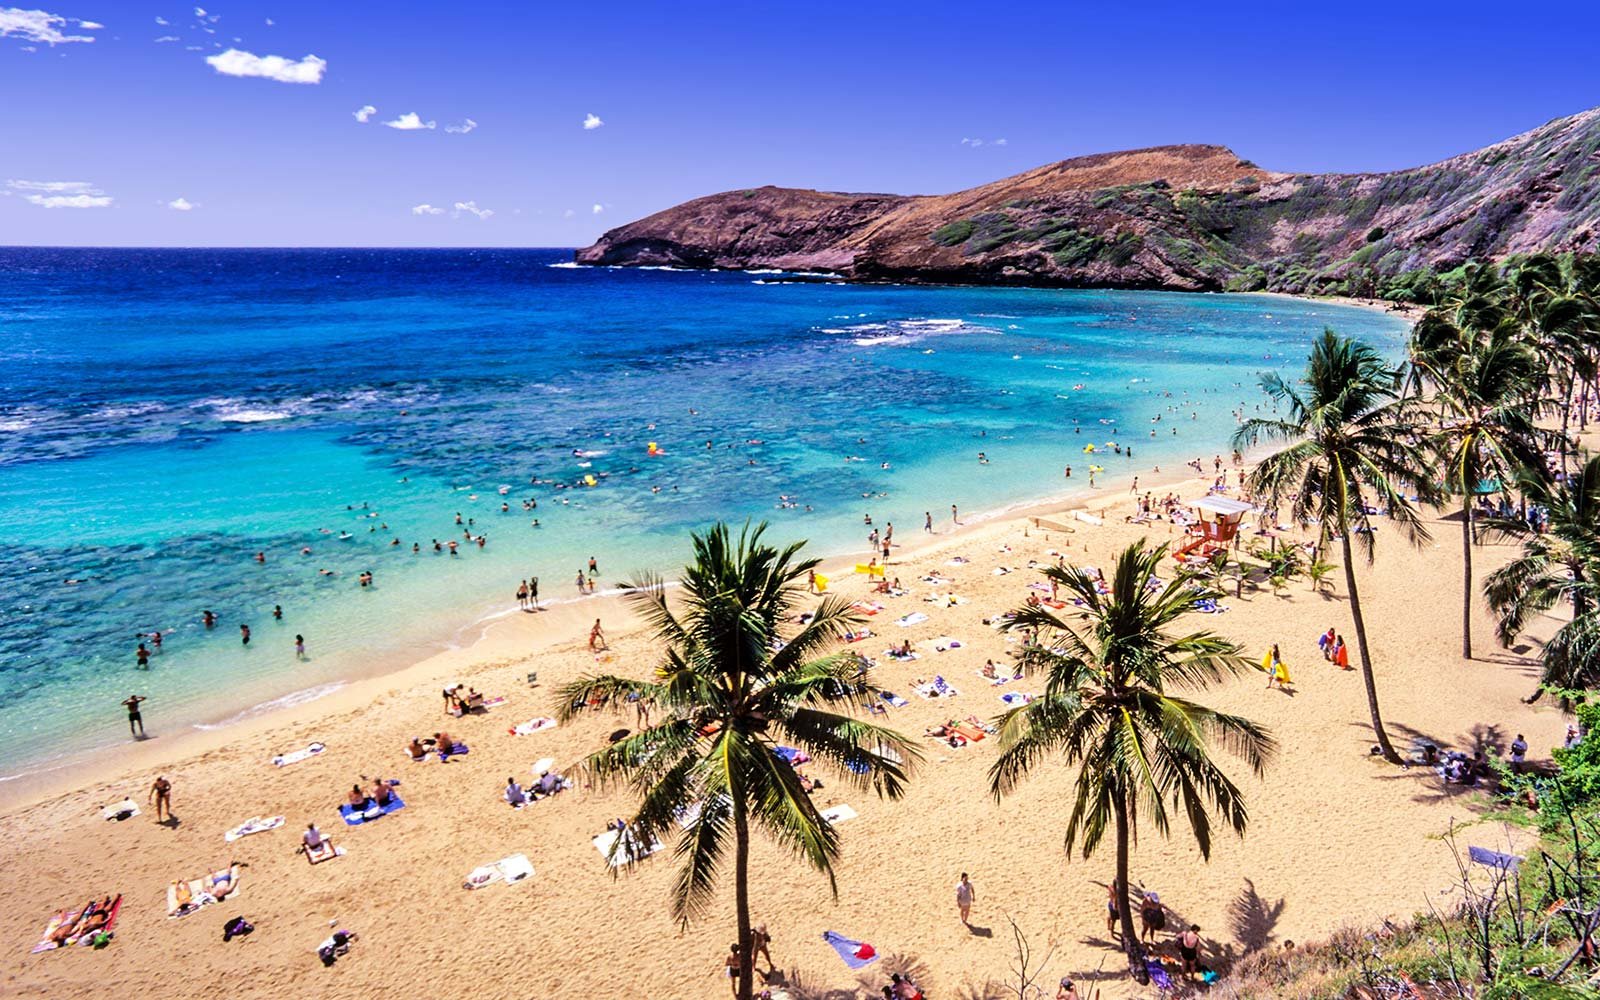 Can You Pass This Basic Middle School History Test? Hanauma Bay Nature Preserve